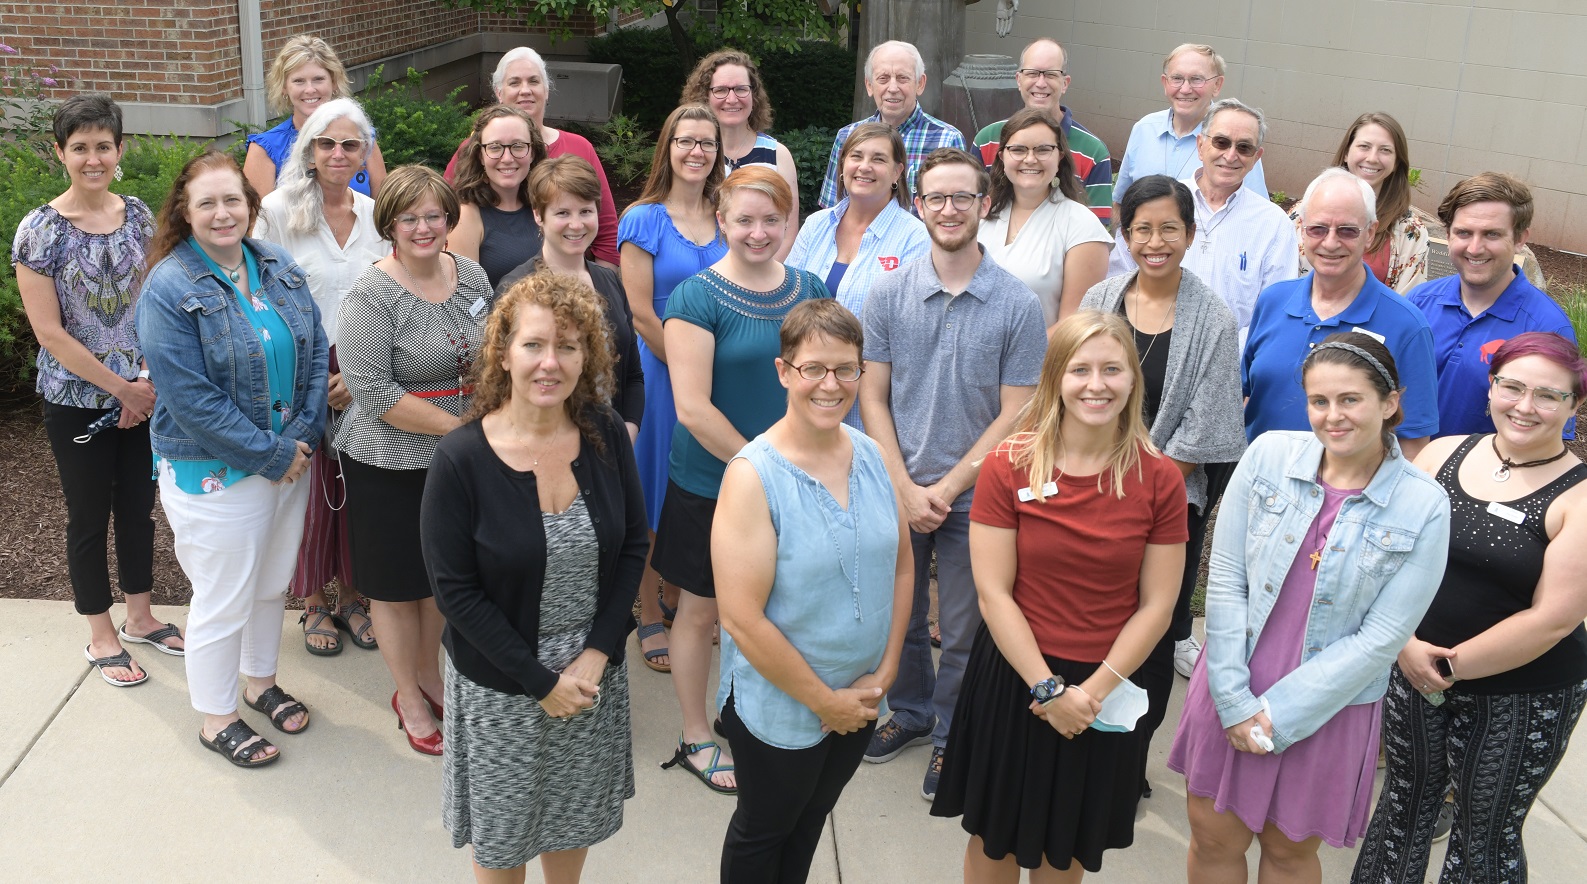 2021-22 campus ministry staff